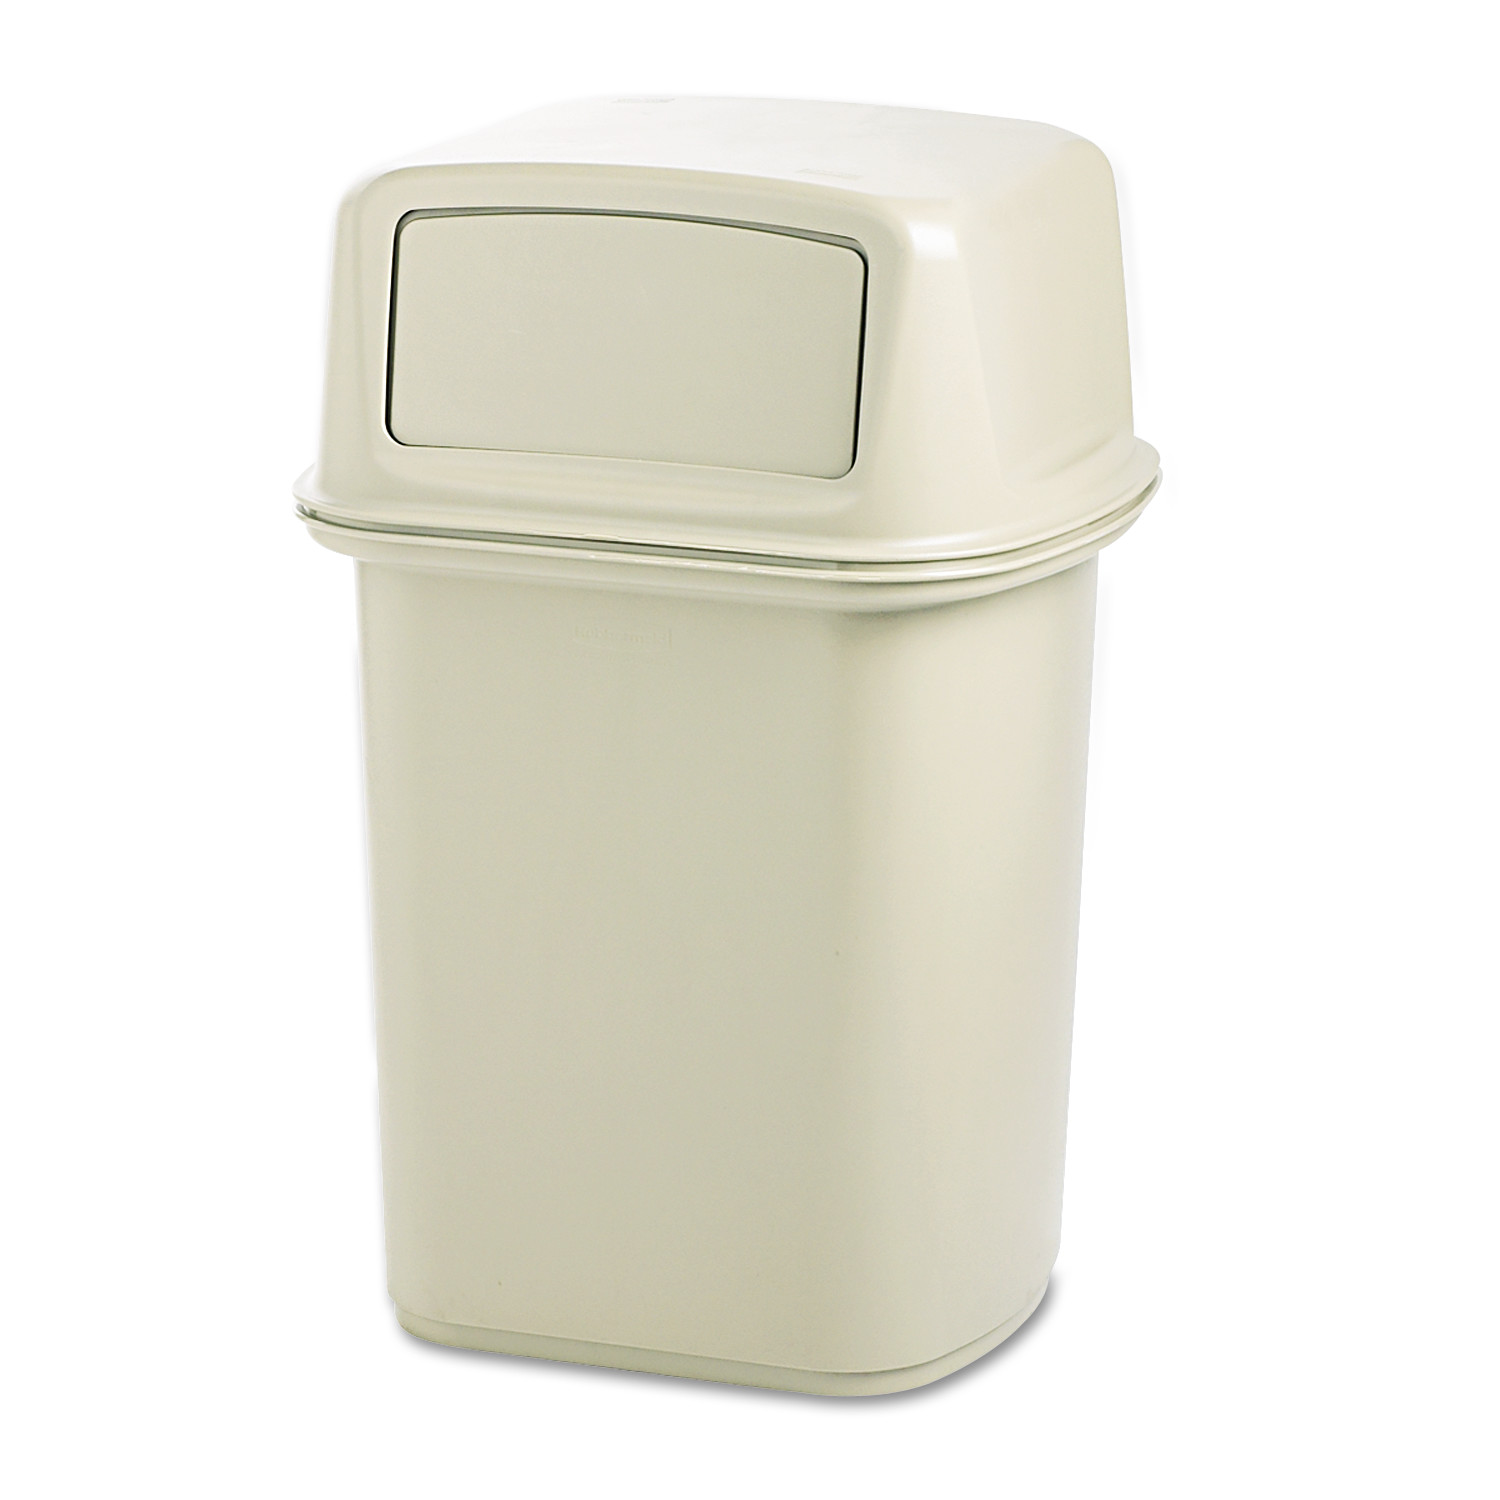 Ranger Fire-Safe Container, Square, Structural Foam, 45gal, Beige